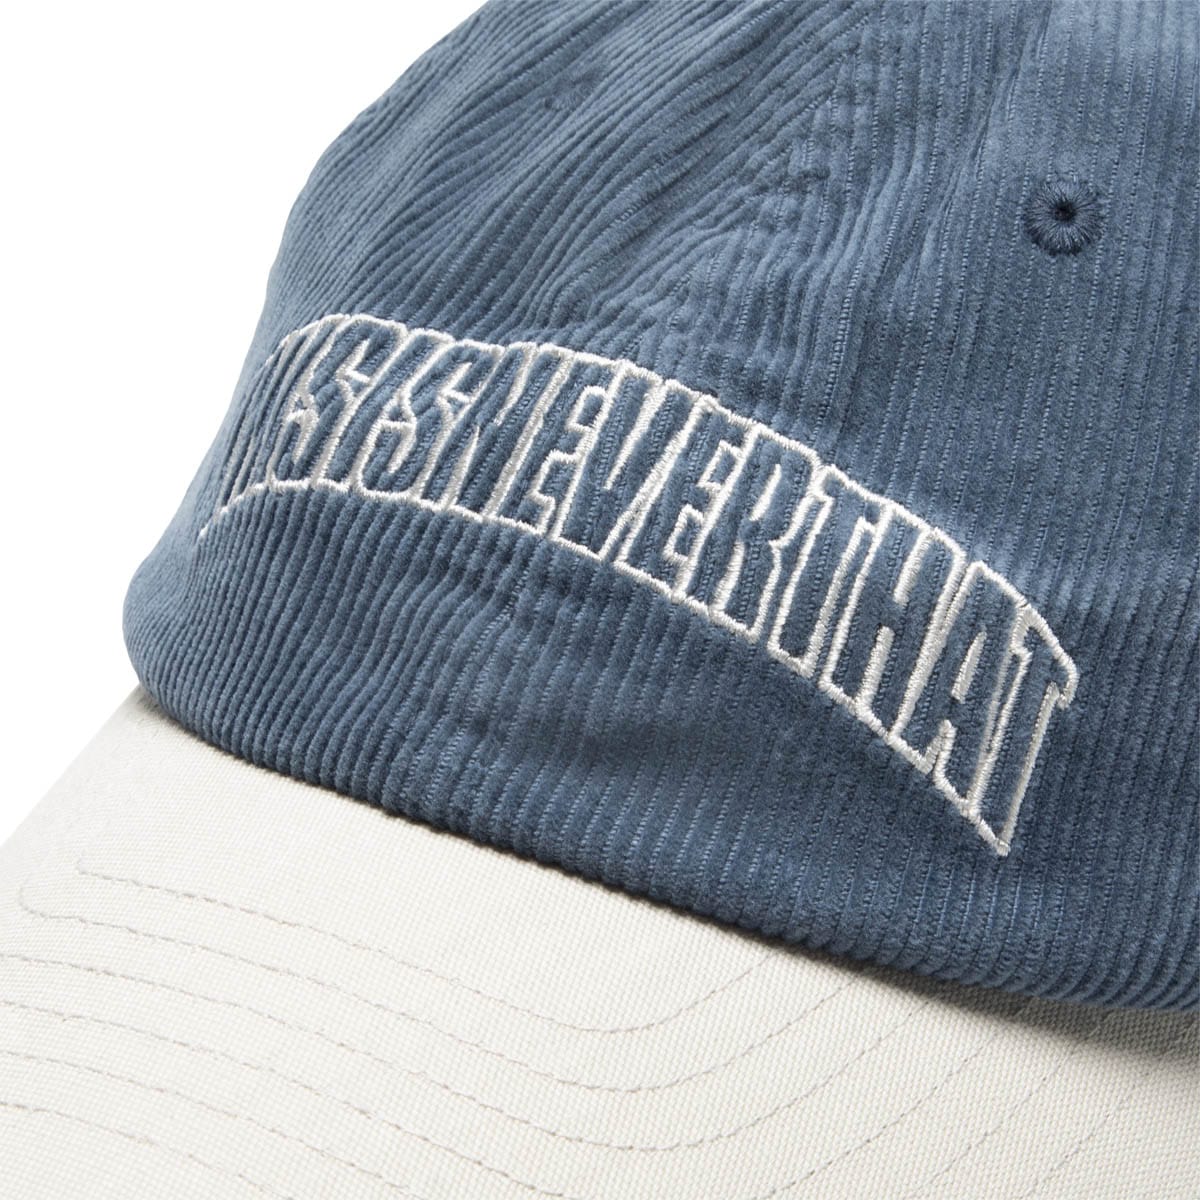 thisisneverthat Bags & Accessories BLUE / OS CORDUROY ARCH-LOGO CAP